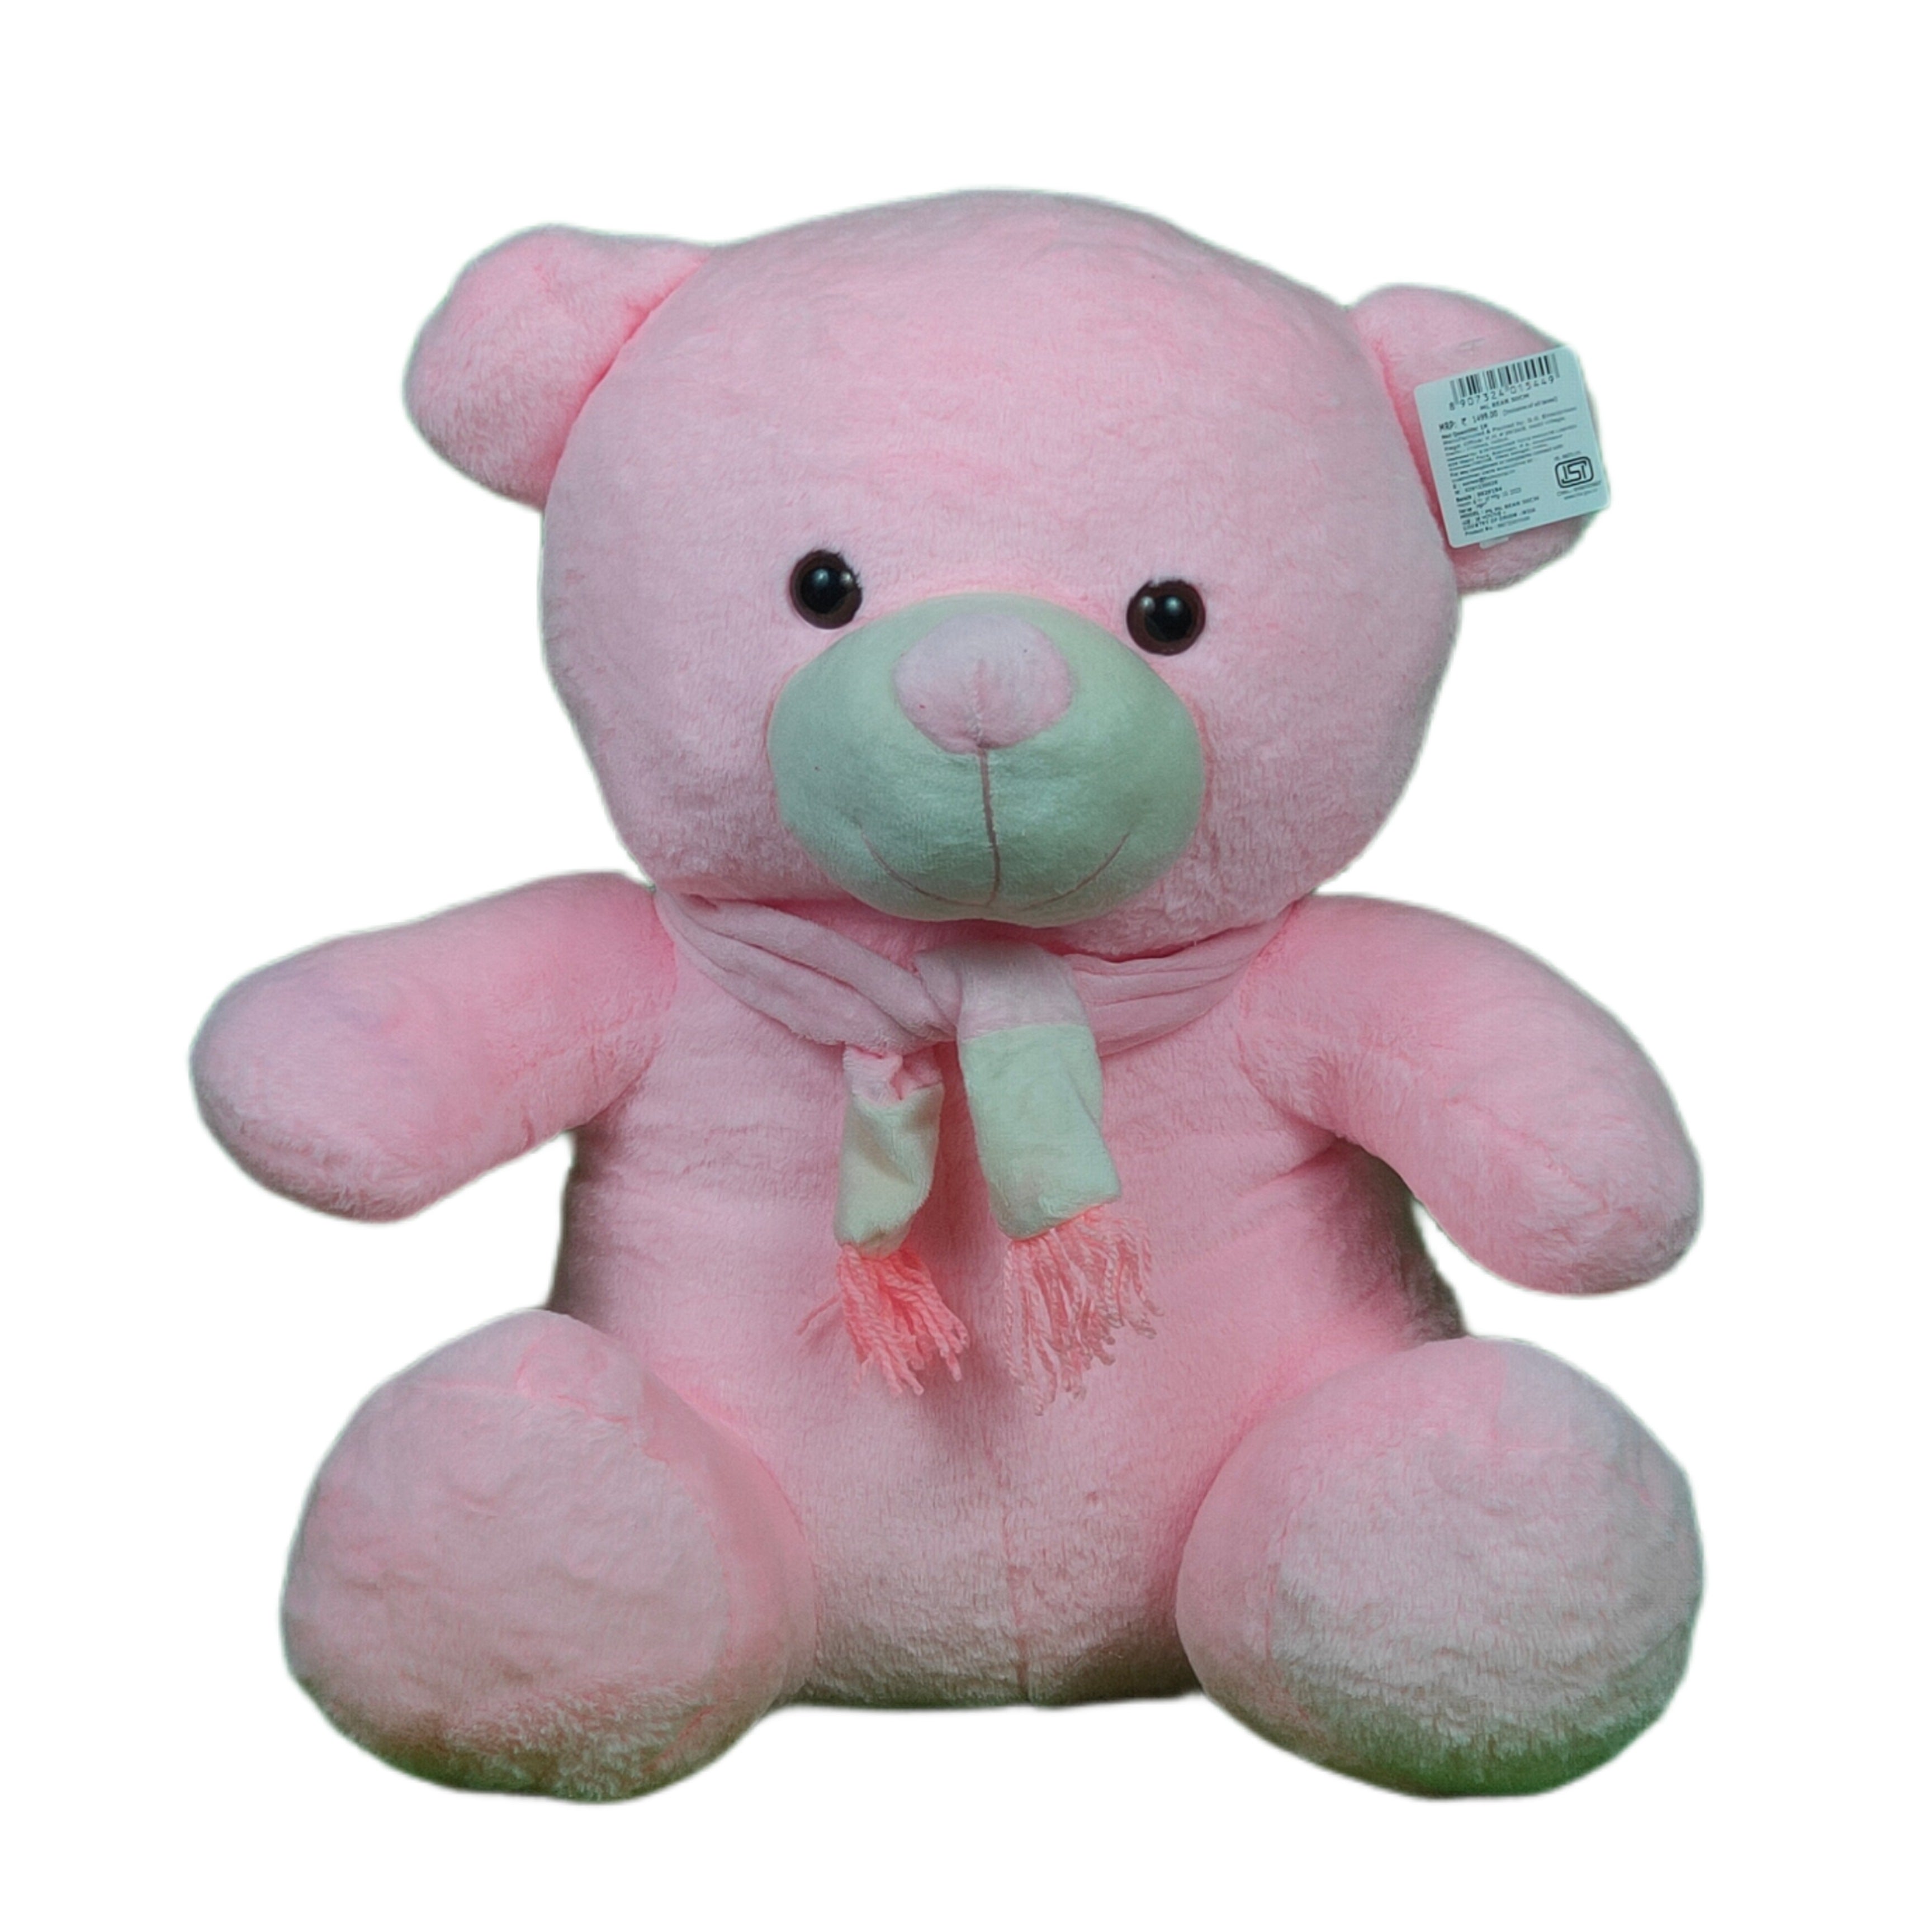 Play Hour Teddy Bear Plush Soft Toy with Muffler for Ages 3 Years and Up - Baby Pink, 50cm